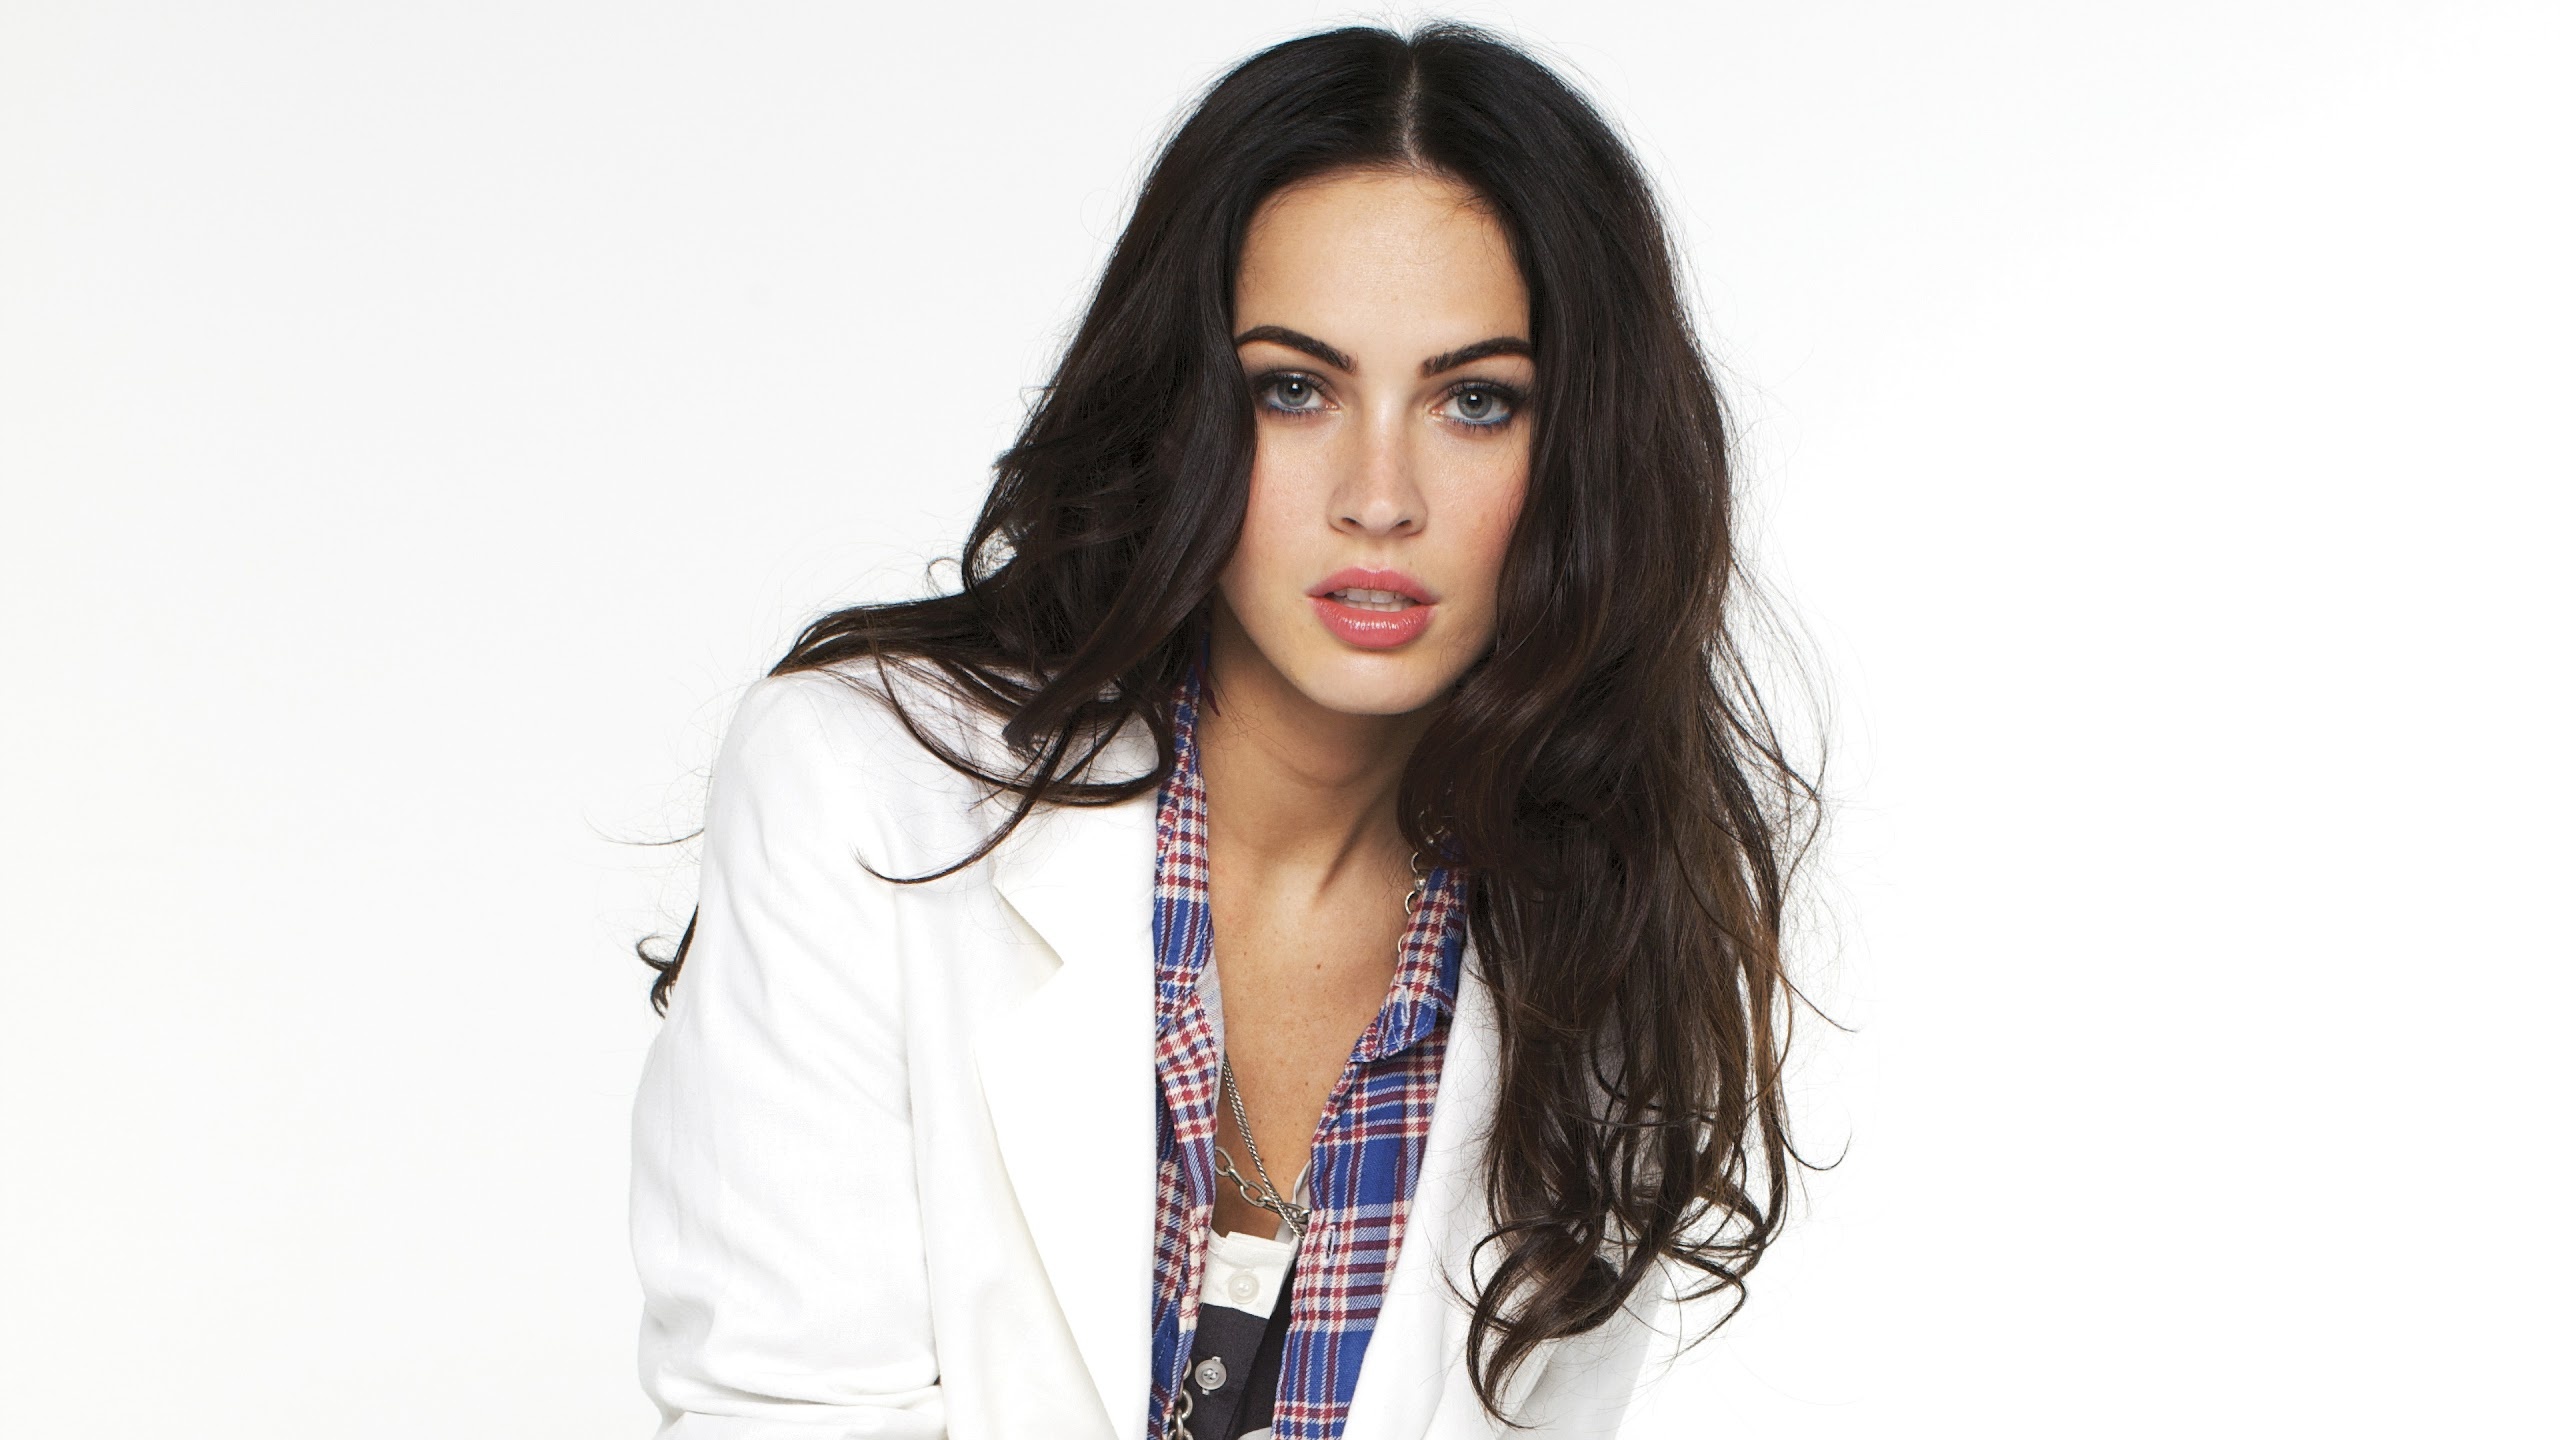 Megan Fox: Played Mikaela Banes in "Transformers". 2560x1440 HD Background.